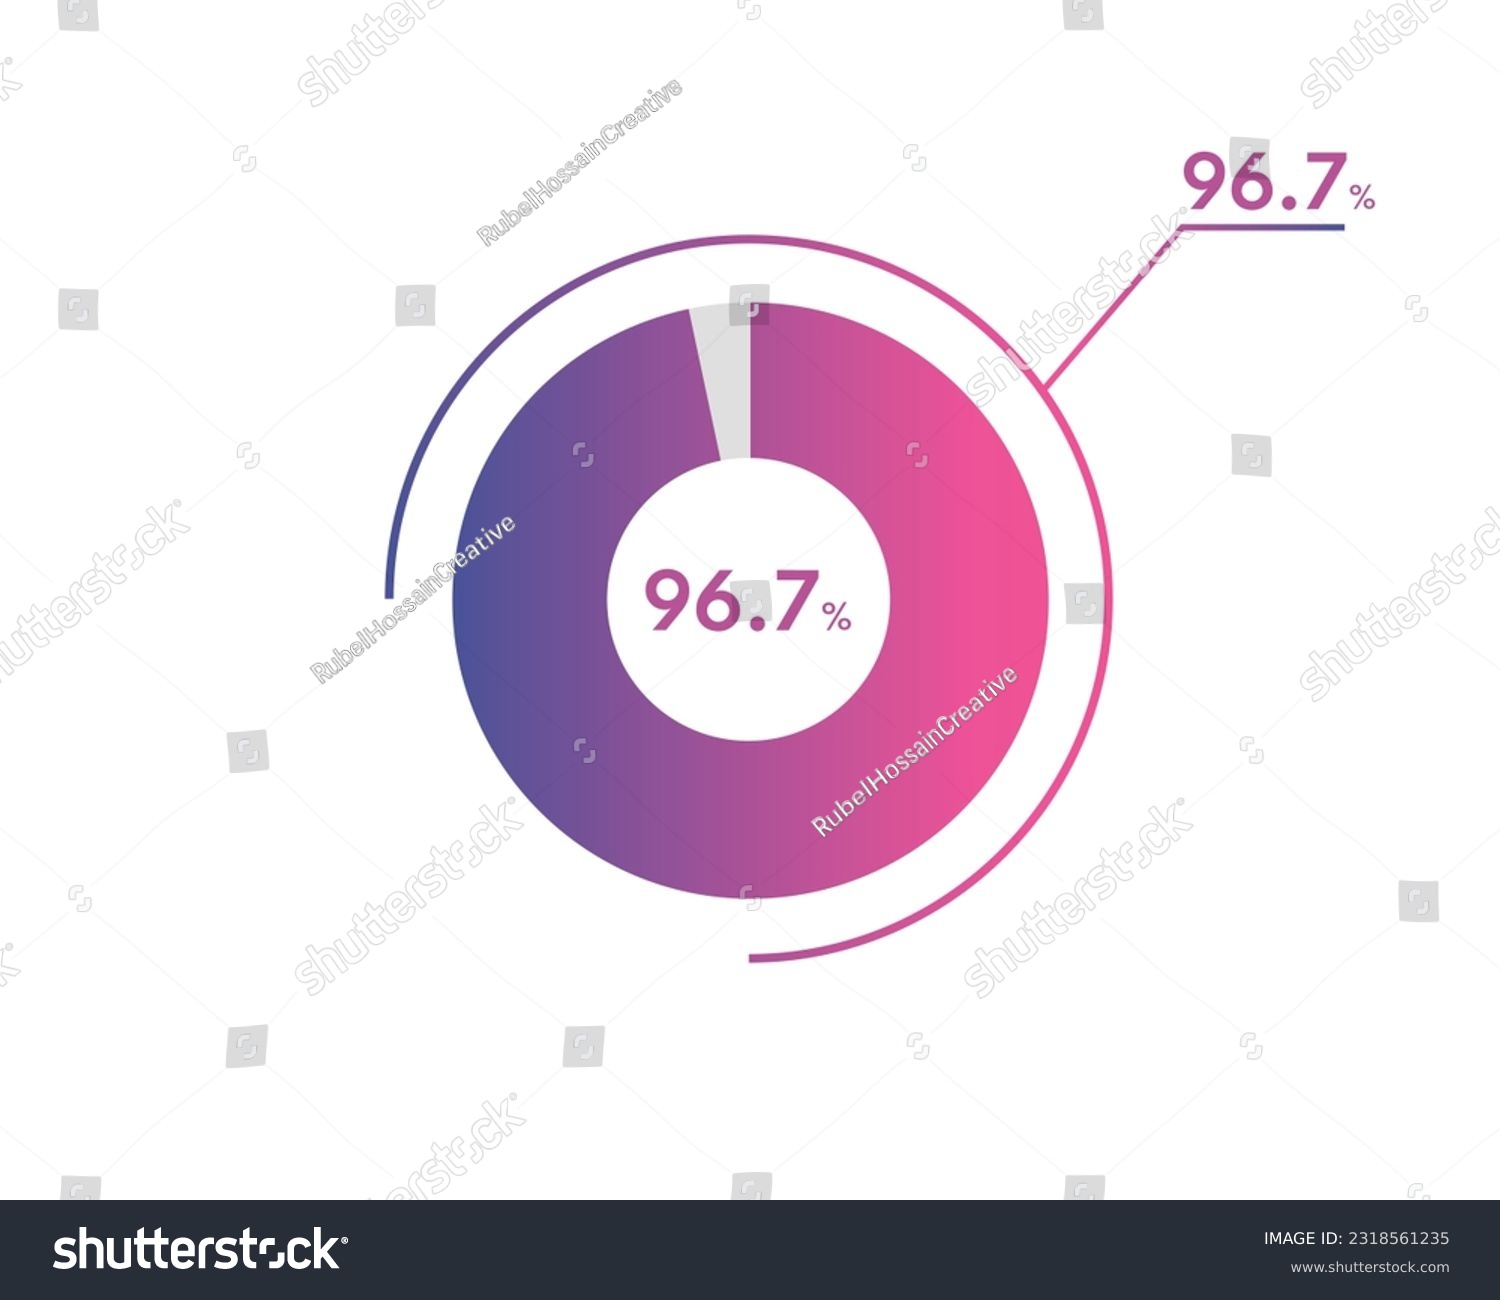 SVG of 96.7 Percentage circle diagrams Infographics vector, circle diagram business illustration, Designing the 96.7% Segment in the Pie Chart. svg